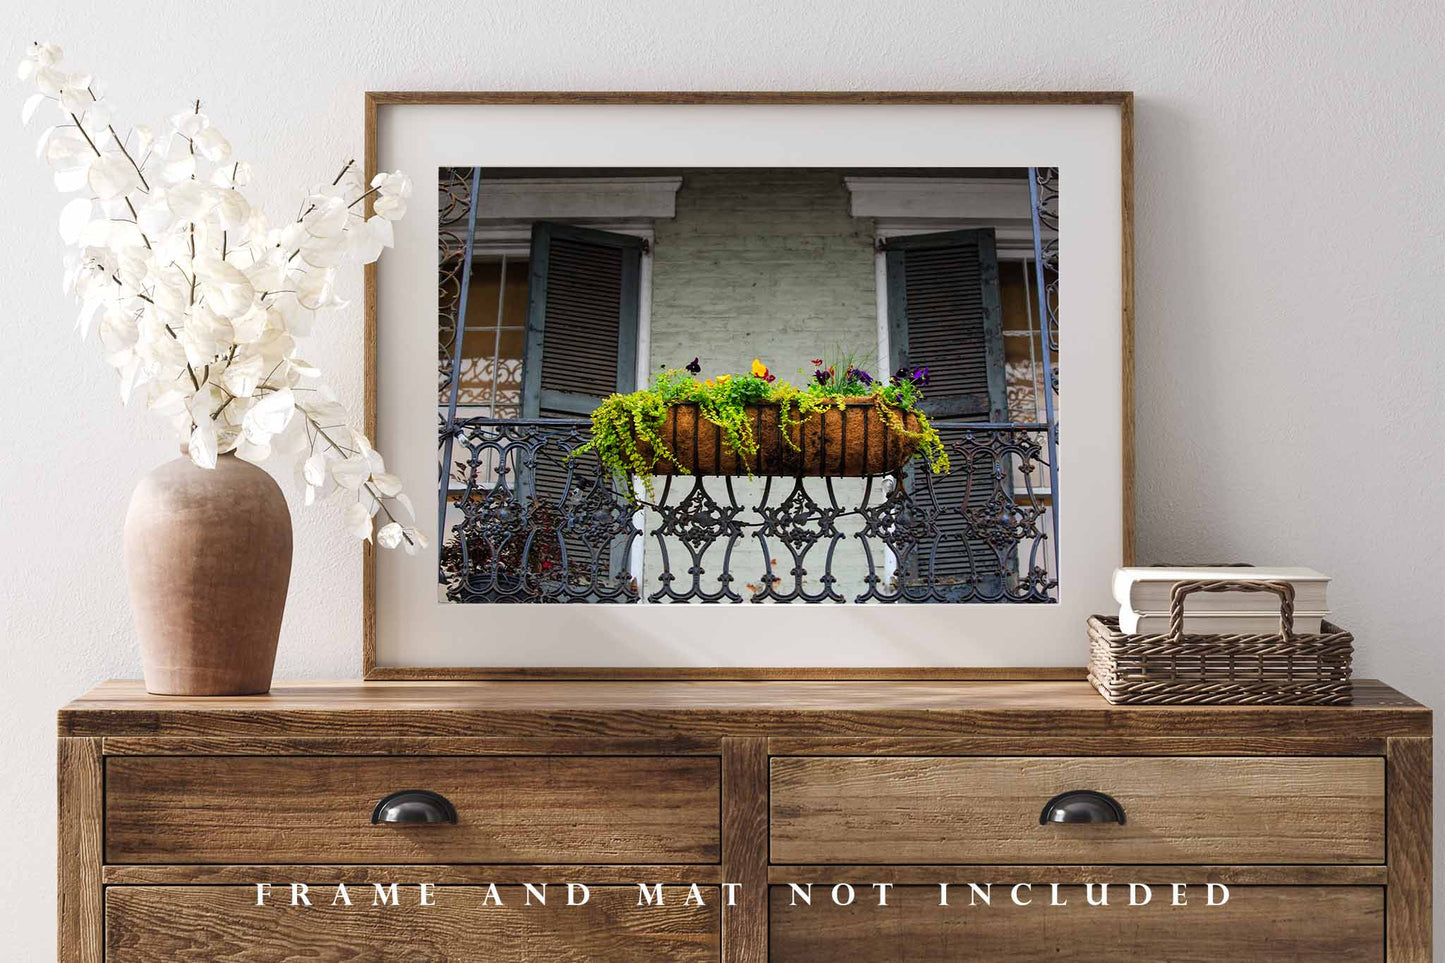 NOLA Photography Print (Not Framed) Picture of Pansies in Planter on Balcony in New Orleans Louisiana Flower Wall Art French Quarter Decor